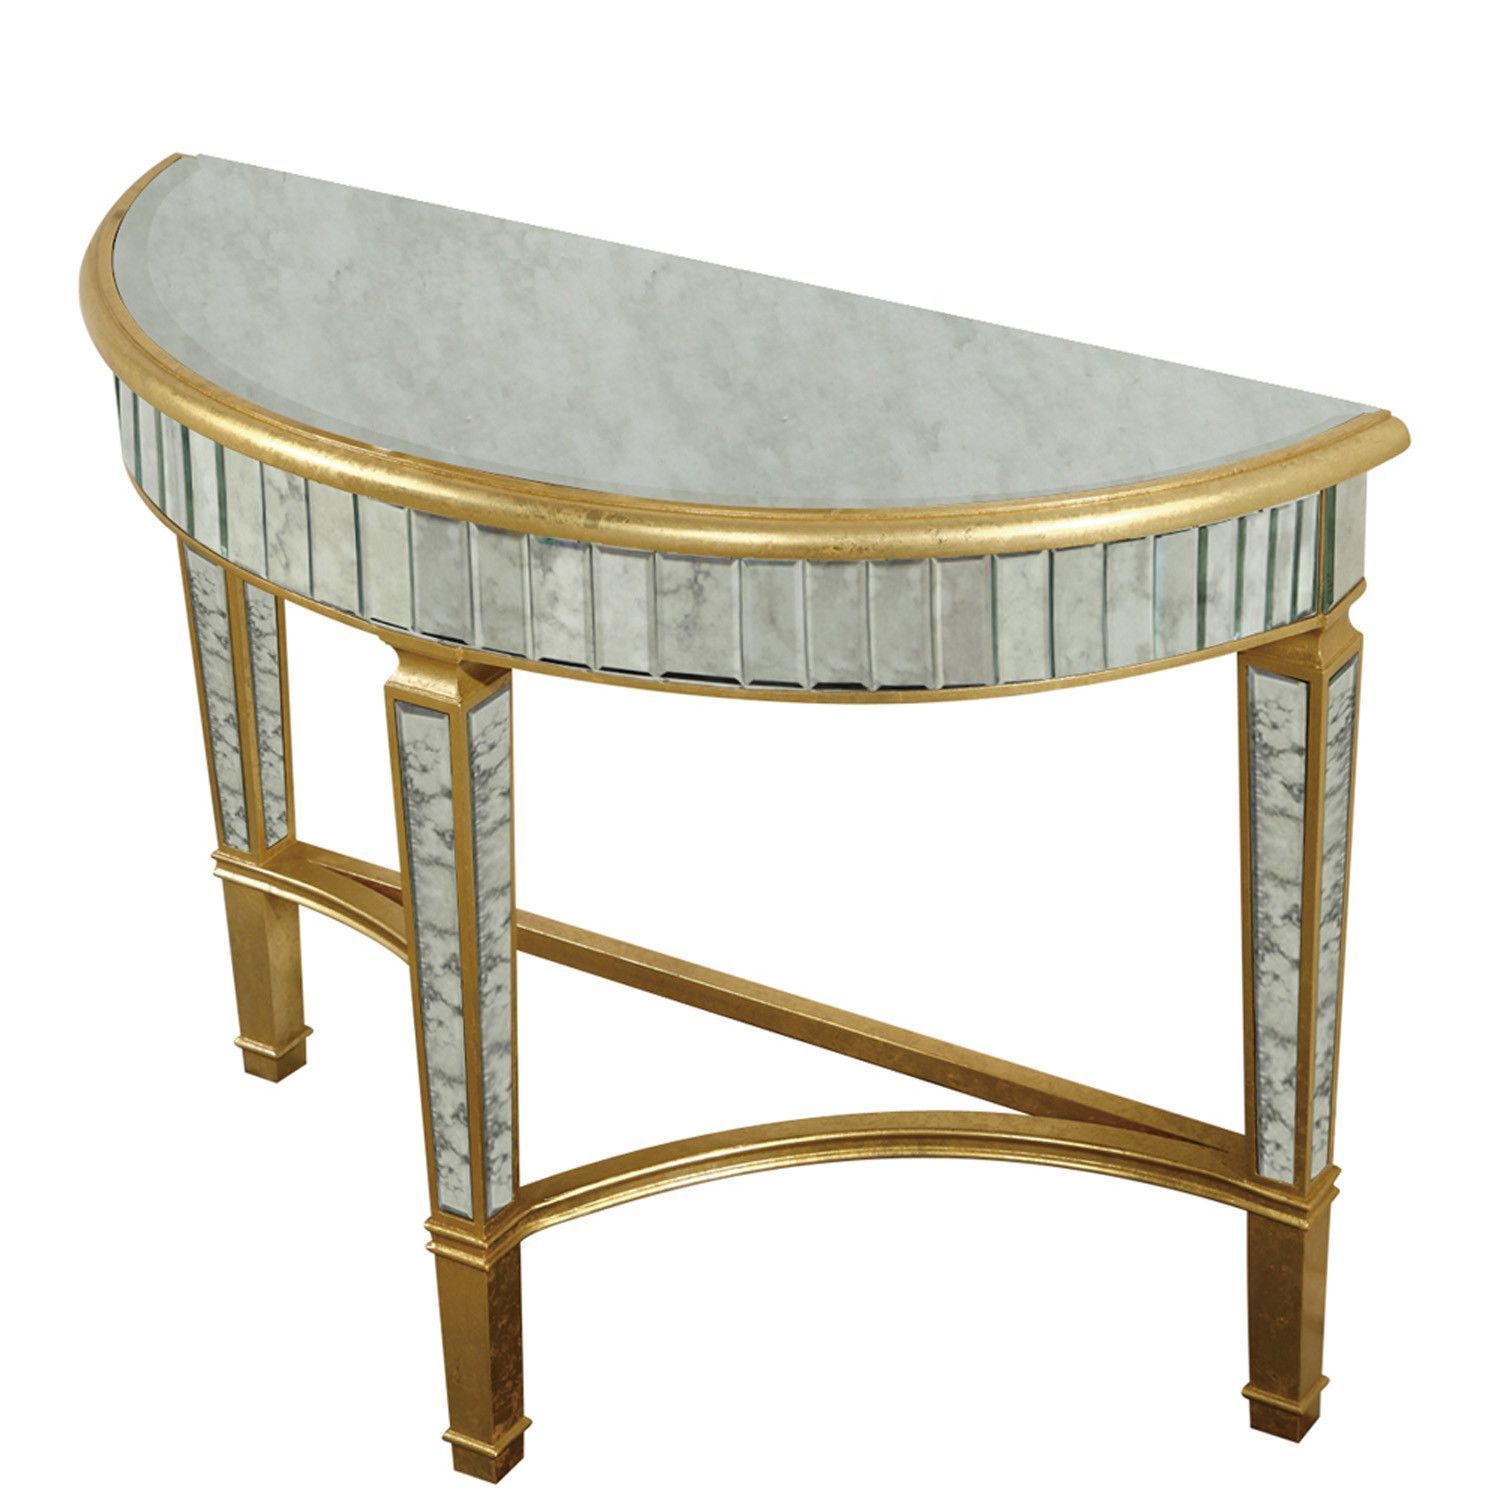 Elegant Lighting – Half Moon Table, Gold/antique Mirror | Half Moon In Gold And Mirror Modern Cube Console Tables (View 17 of 20)